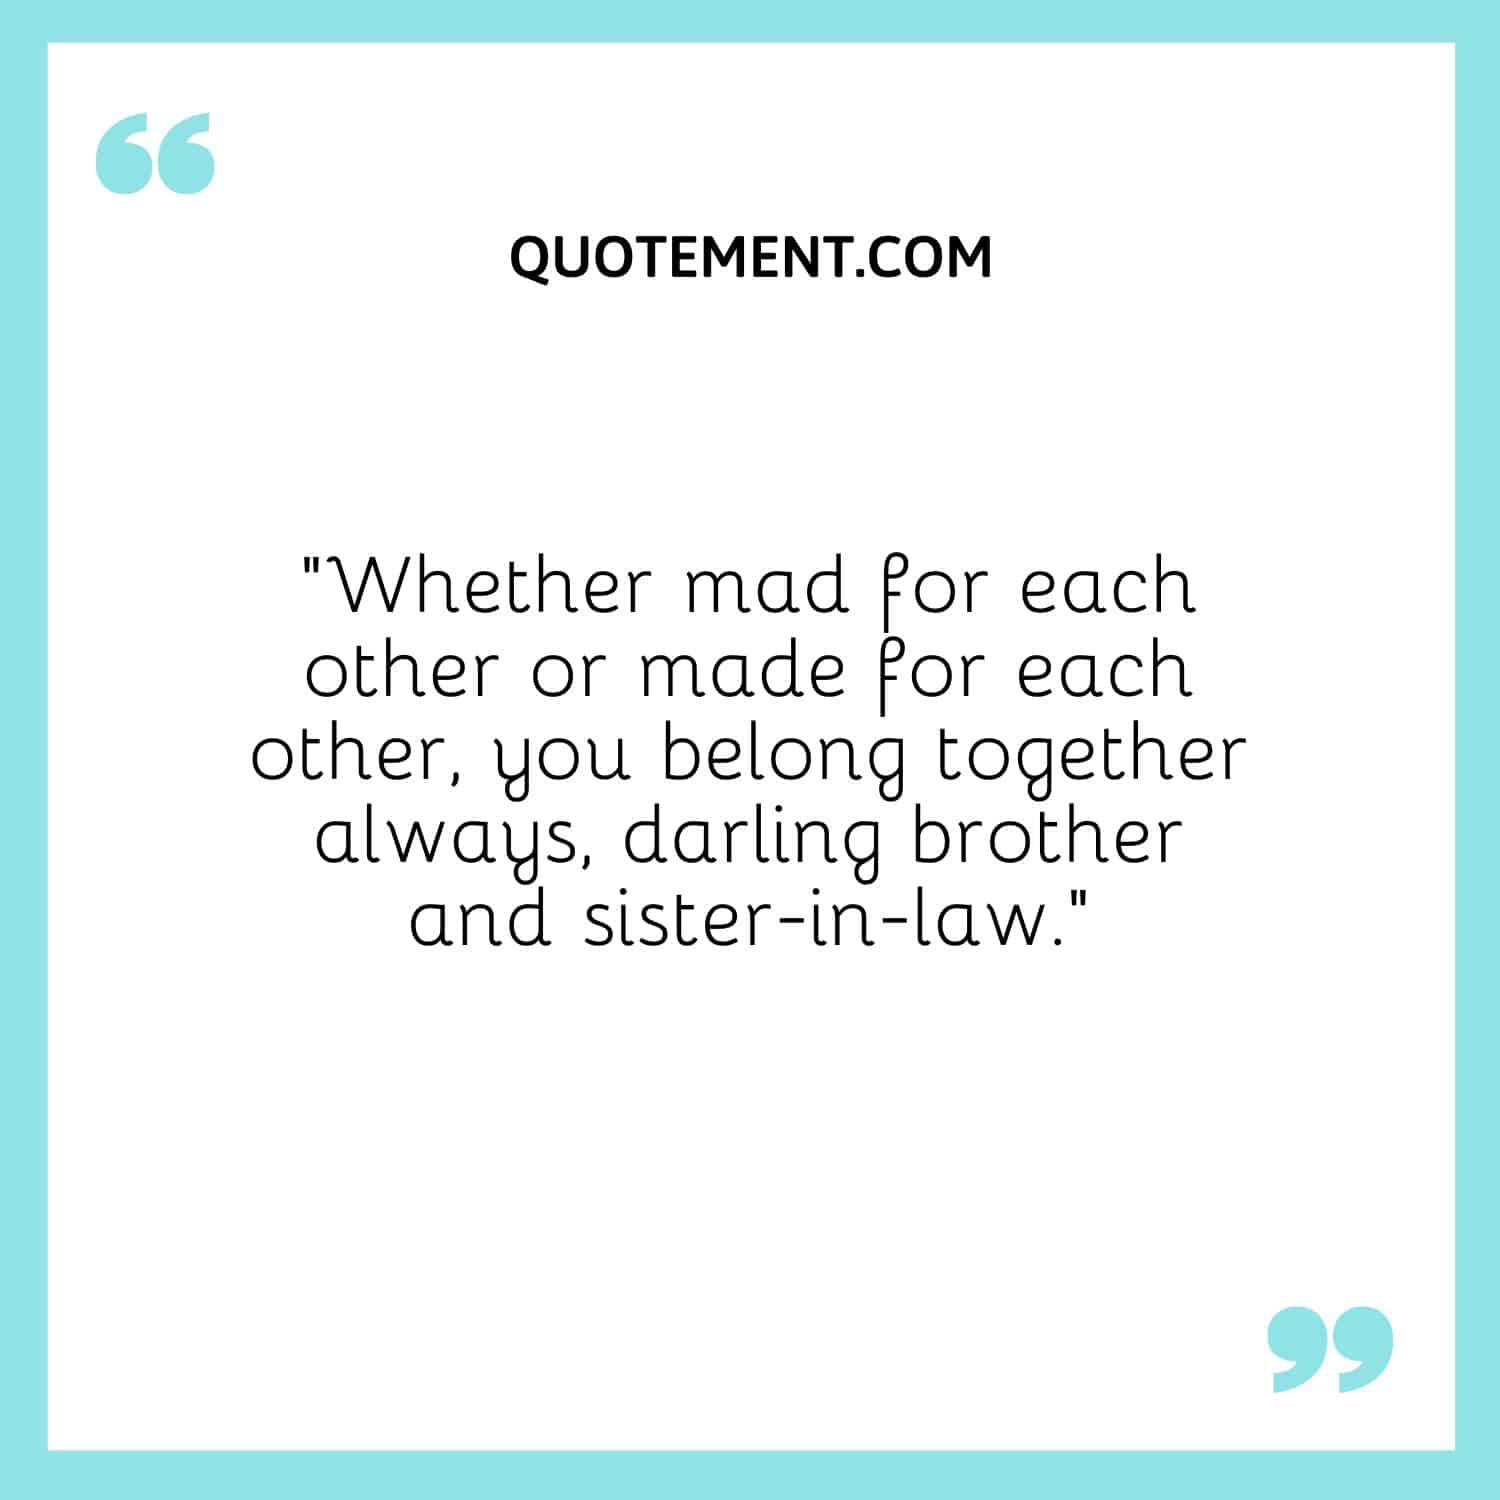 Whether mad for each other or made for each other